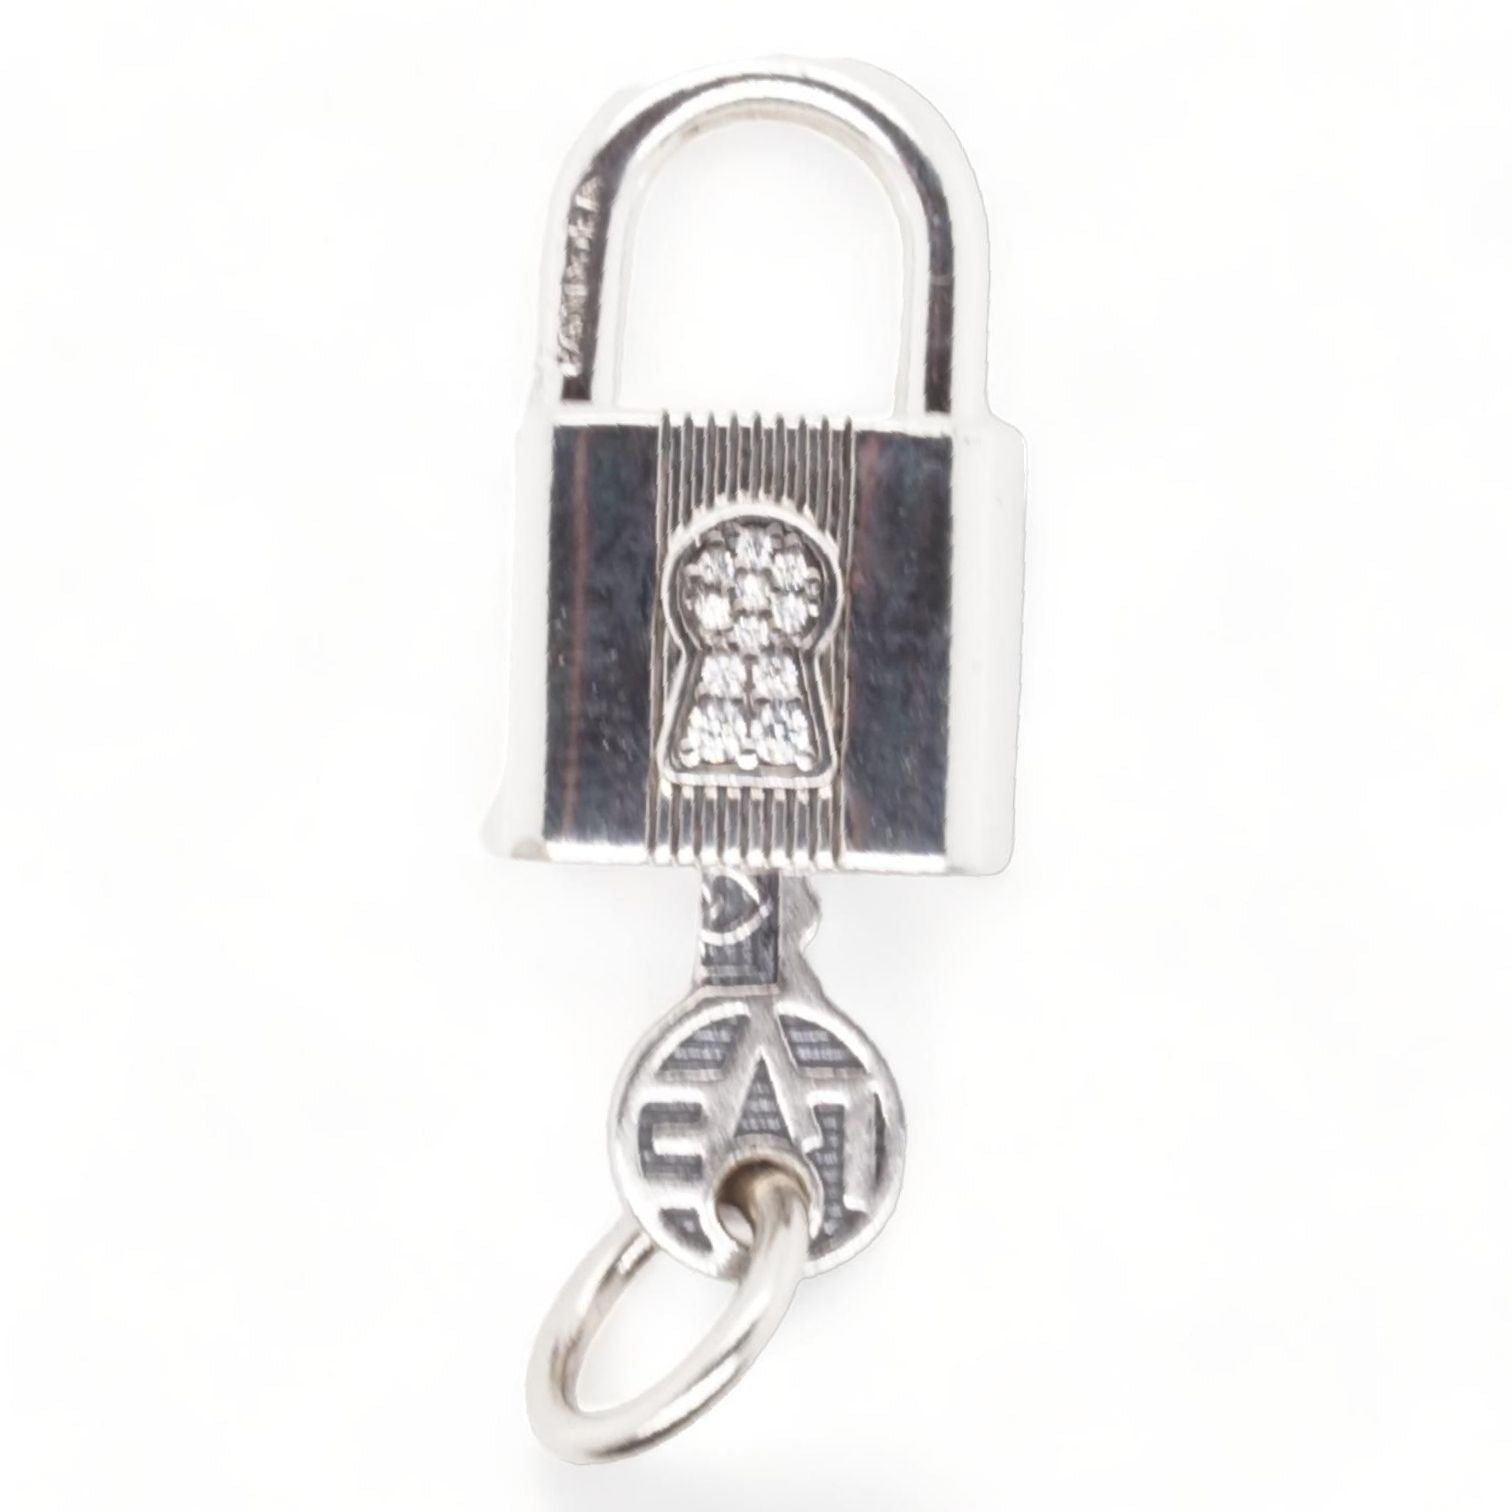 Authentic Louis Vuitton lock and key sets! . Comes on a 14k gold